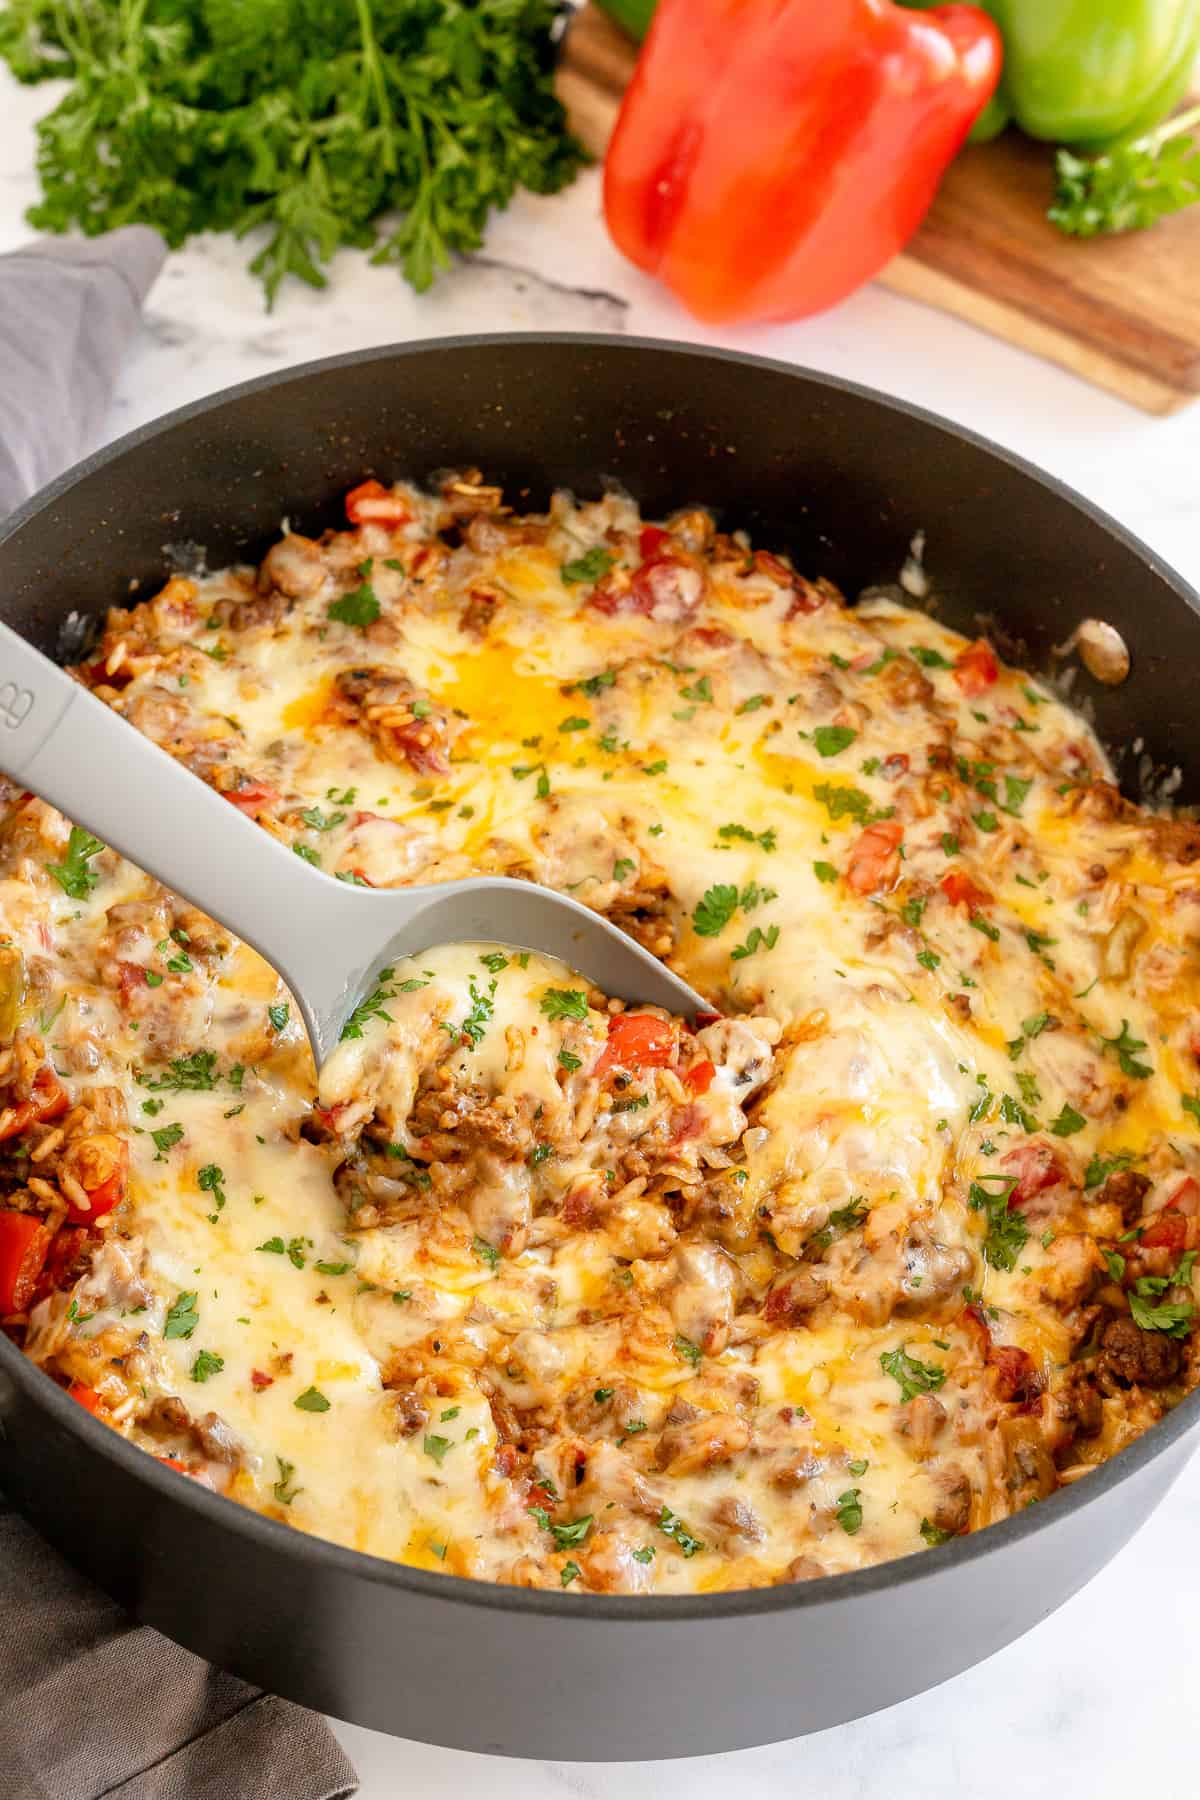 Weekly meal plan ideas #23: A Stuffed Pepper Skillet Bake at From Valerie's Kitchen